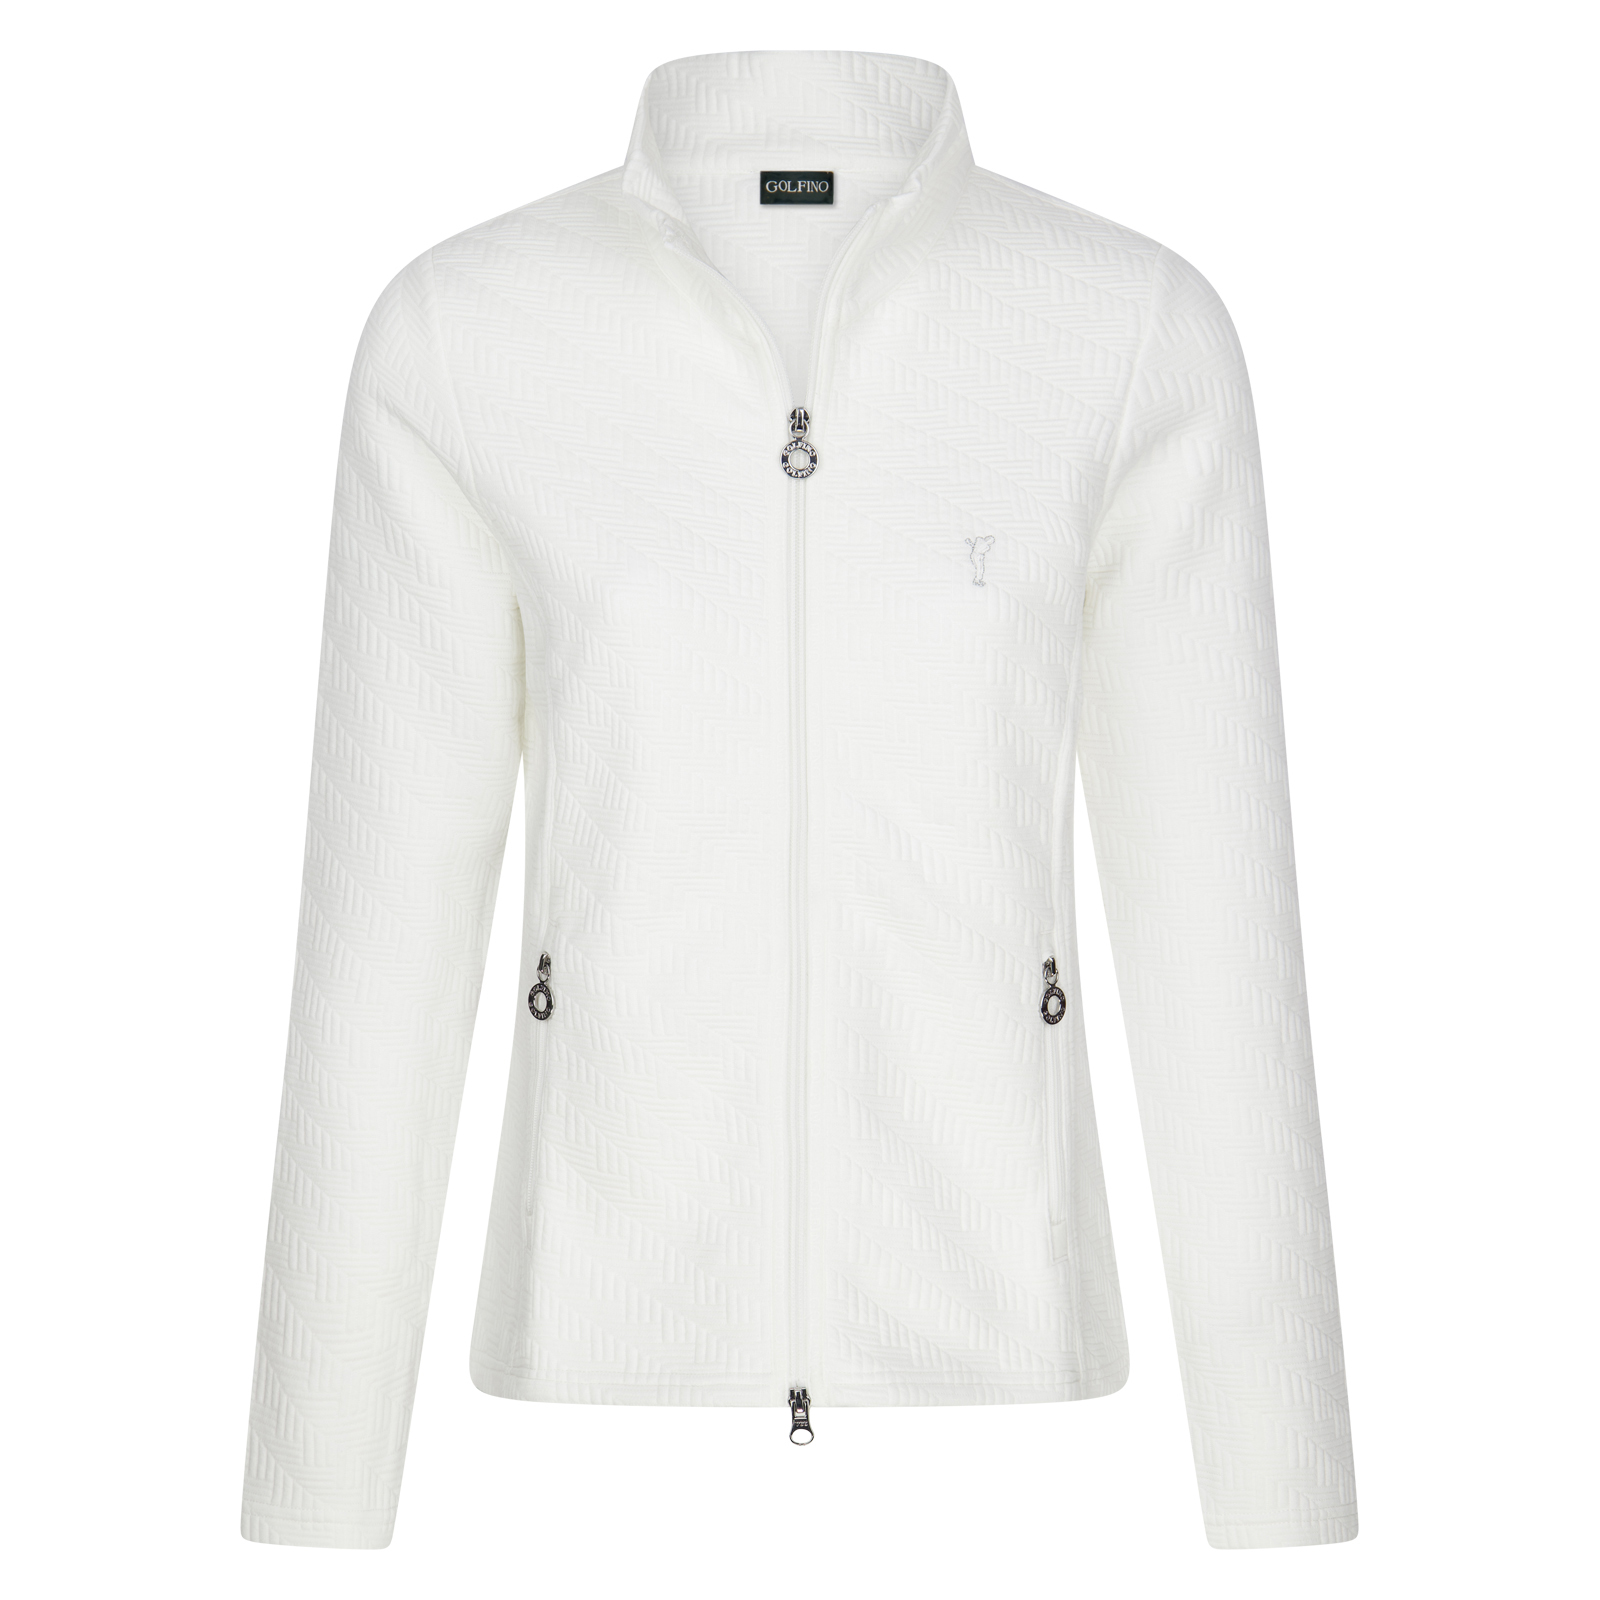 Ladies' cold-repellent golf jacket with textured surface